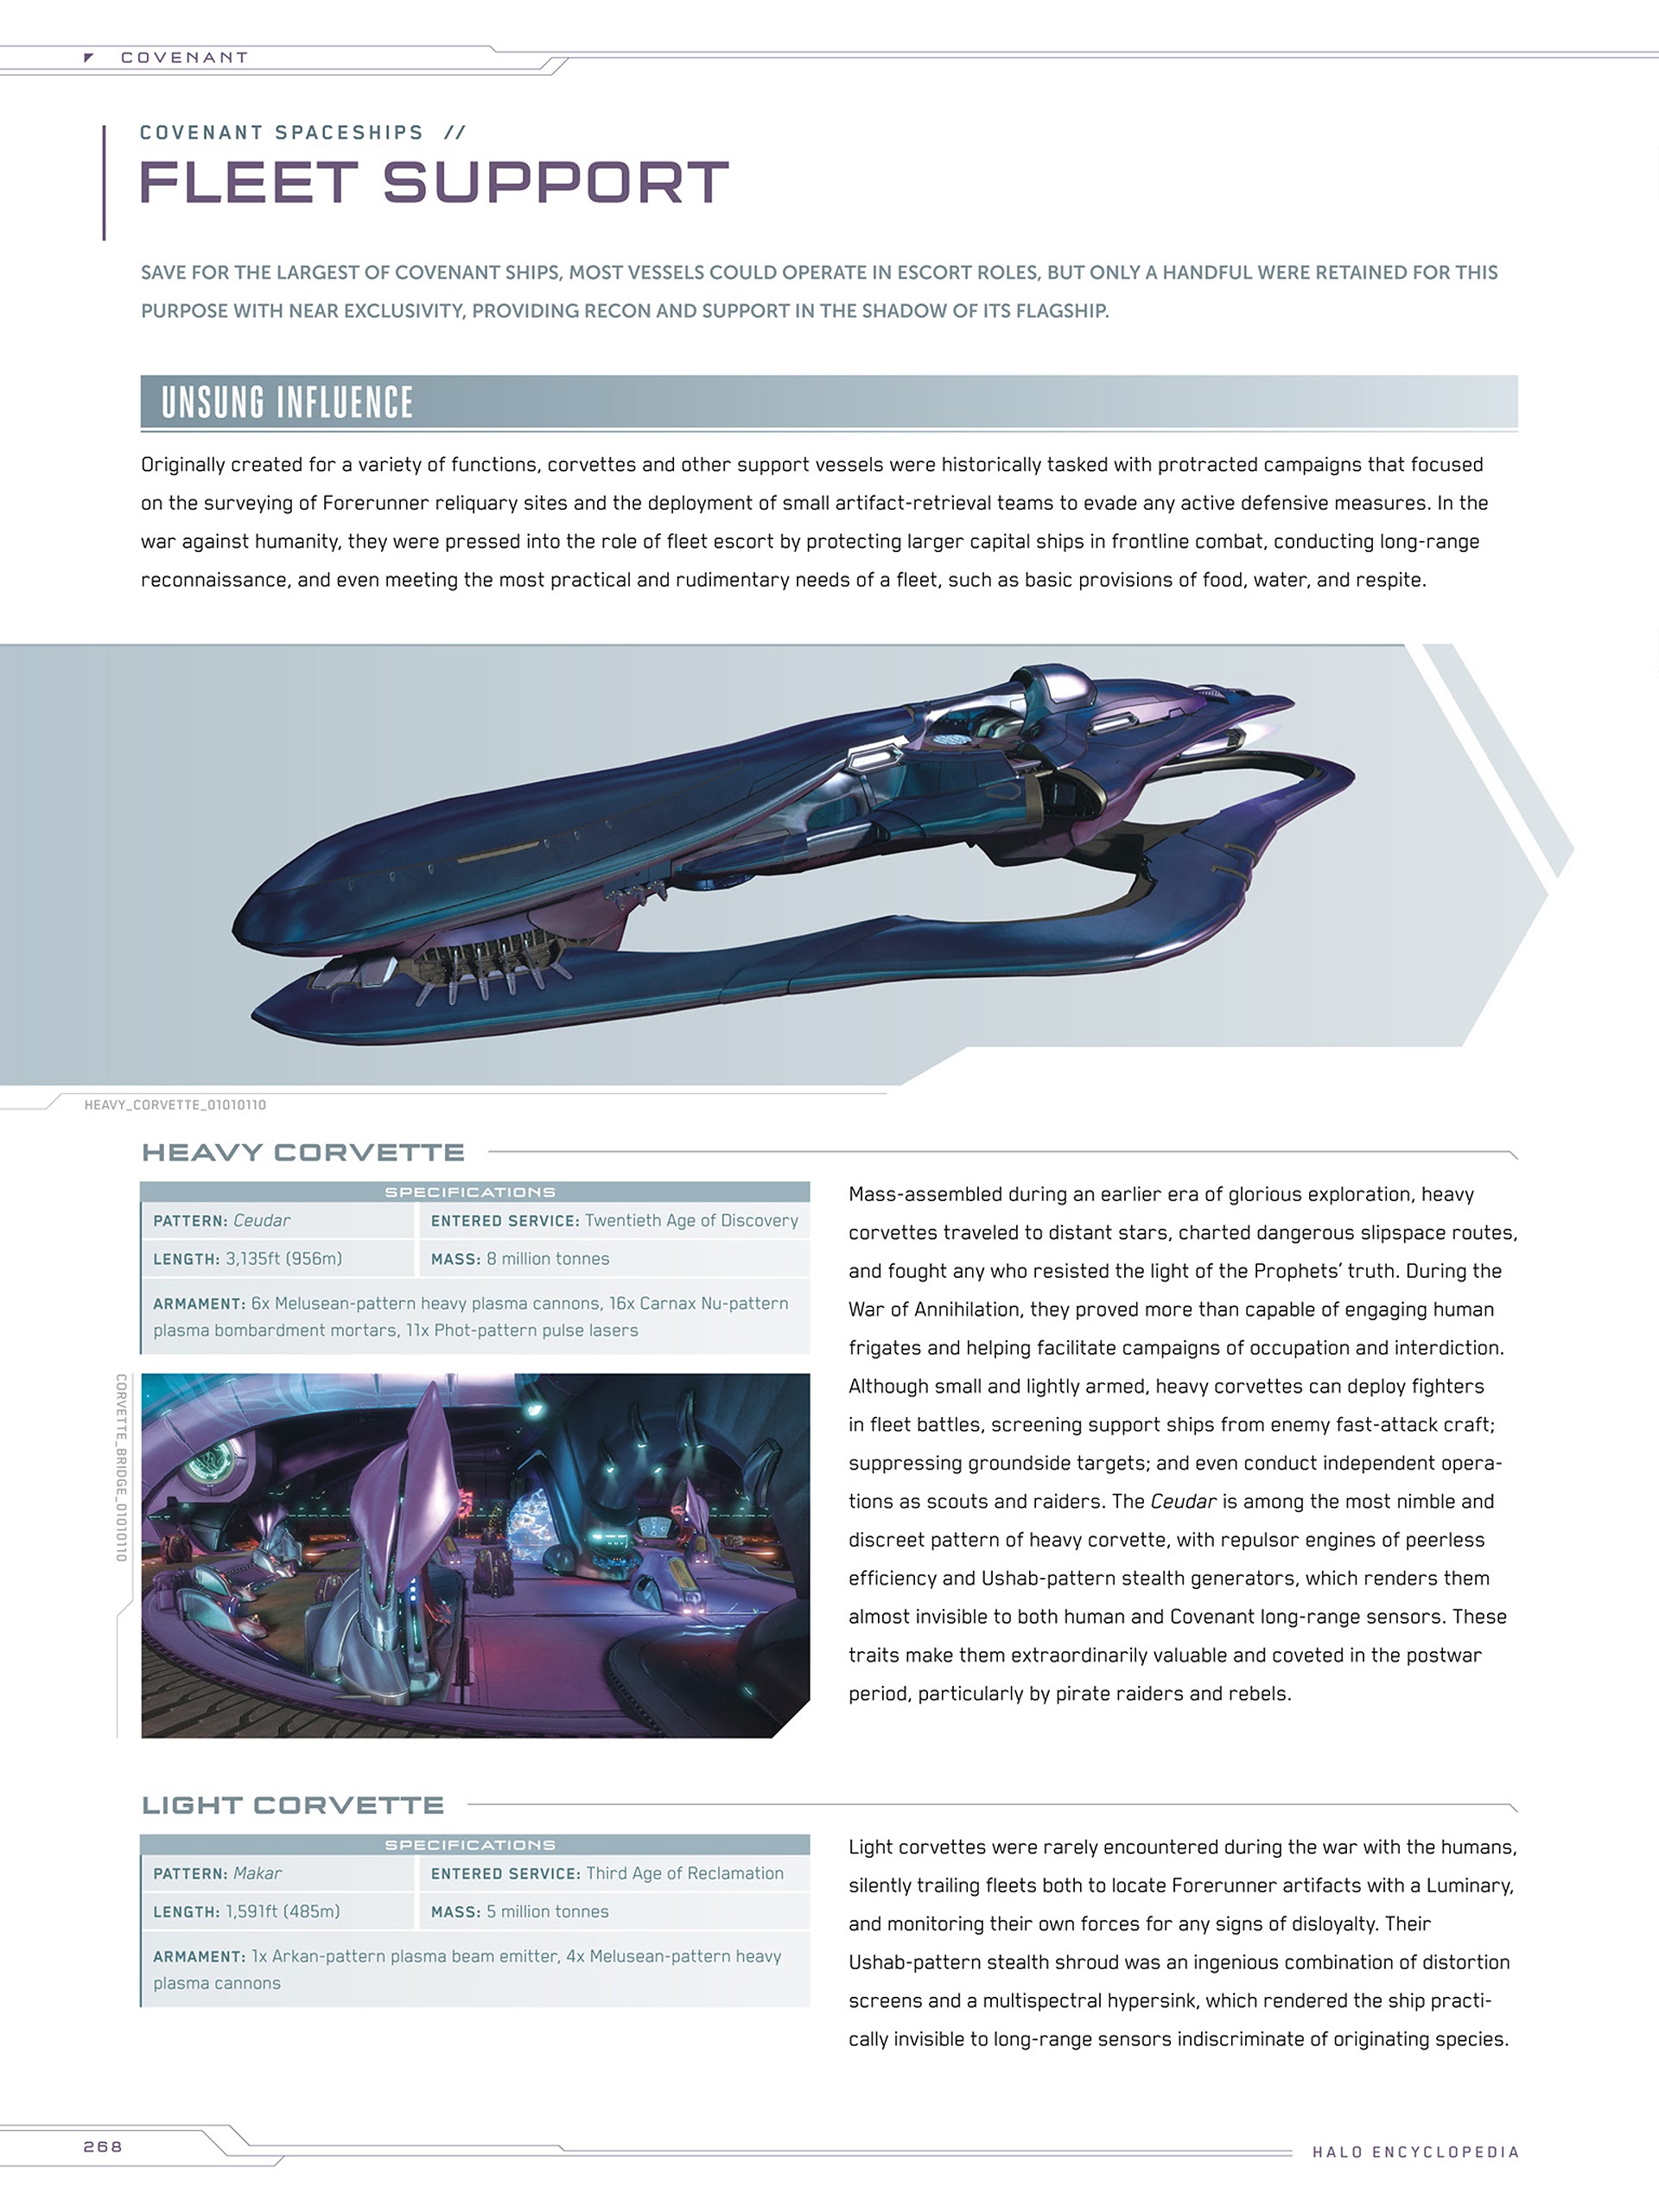 Read online Halo Encyclopedia comic -  Issue # TPB (Part 3) - 64